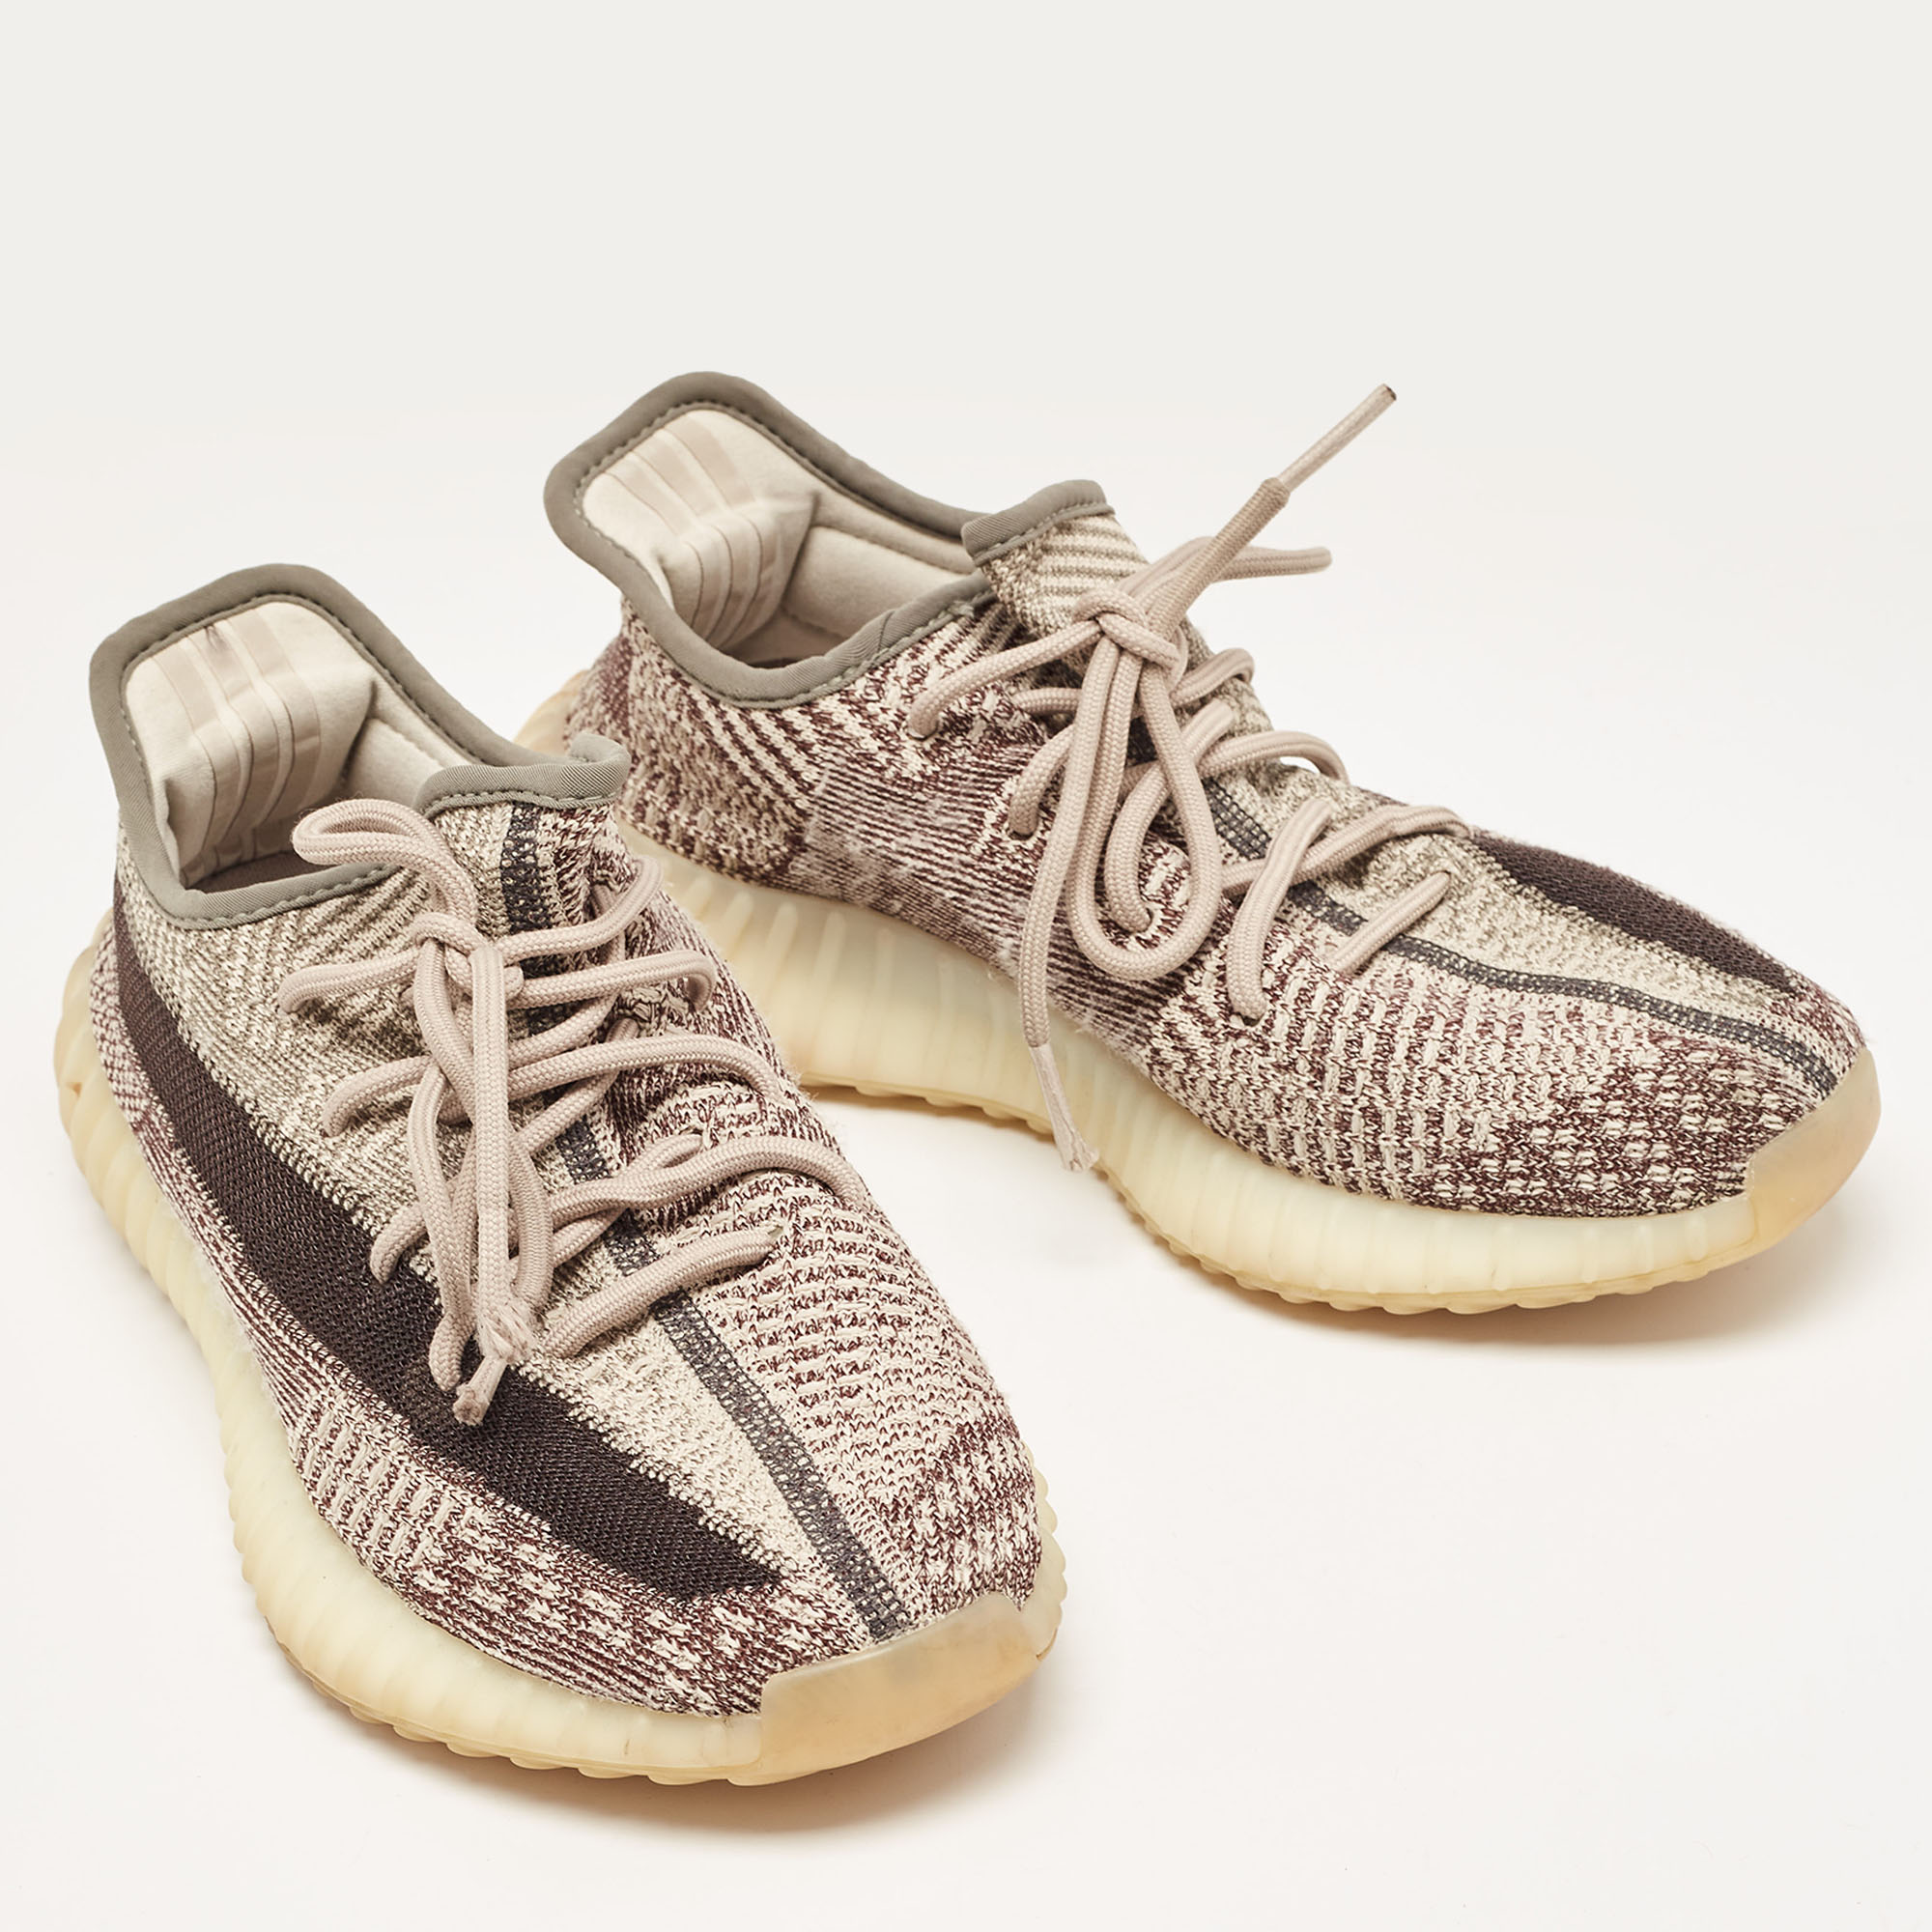 Adidas X Yeezy Brown/Grey Knit Fabric Boost 350 V2 Zyon Sneakers Size 40